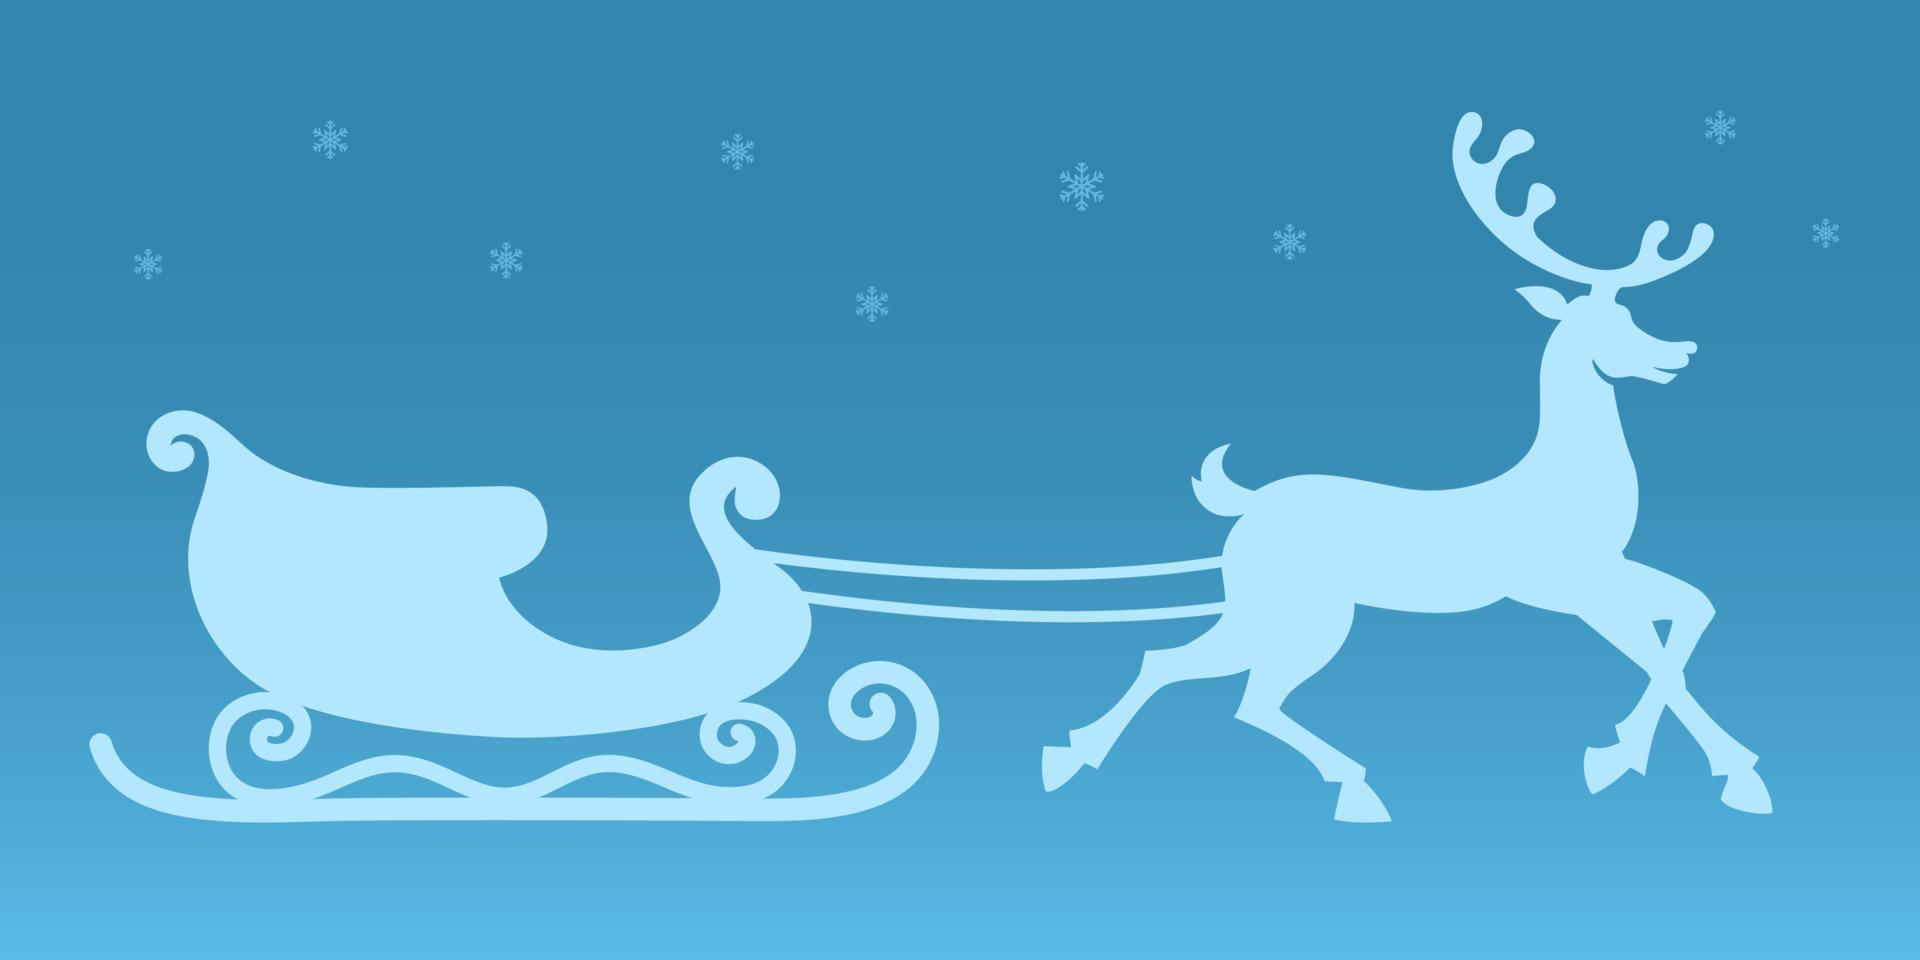 Sleigh and reindeer. Vector silhouette. Christmas sticker. Santa Claus sleigh and harnessed running reindeer. Blue background with snowflakes. Christmas illustration for decorations